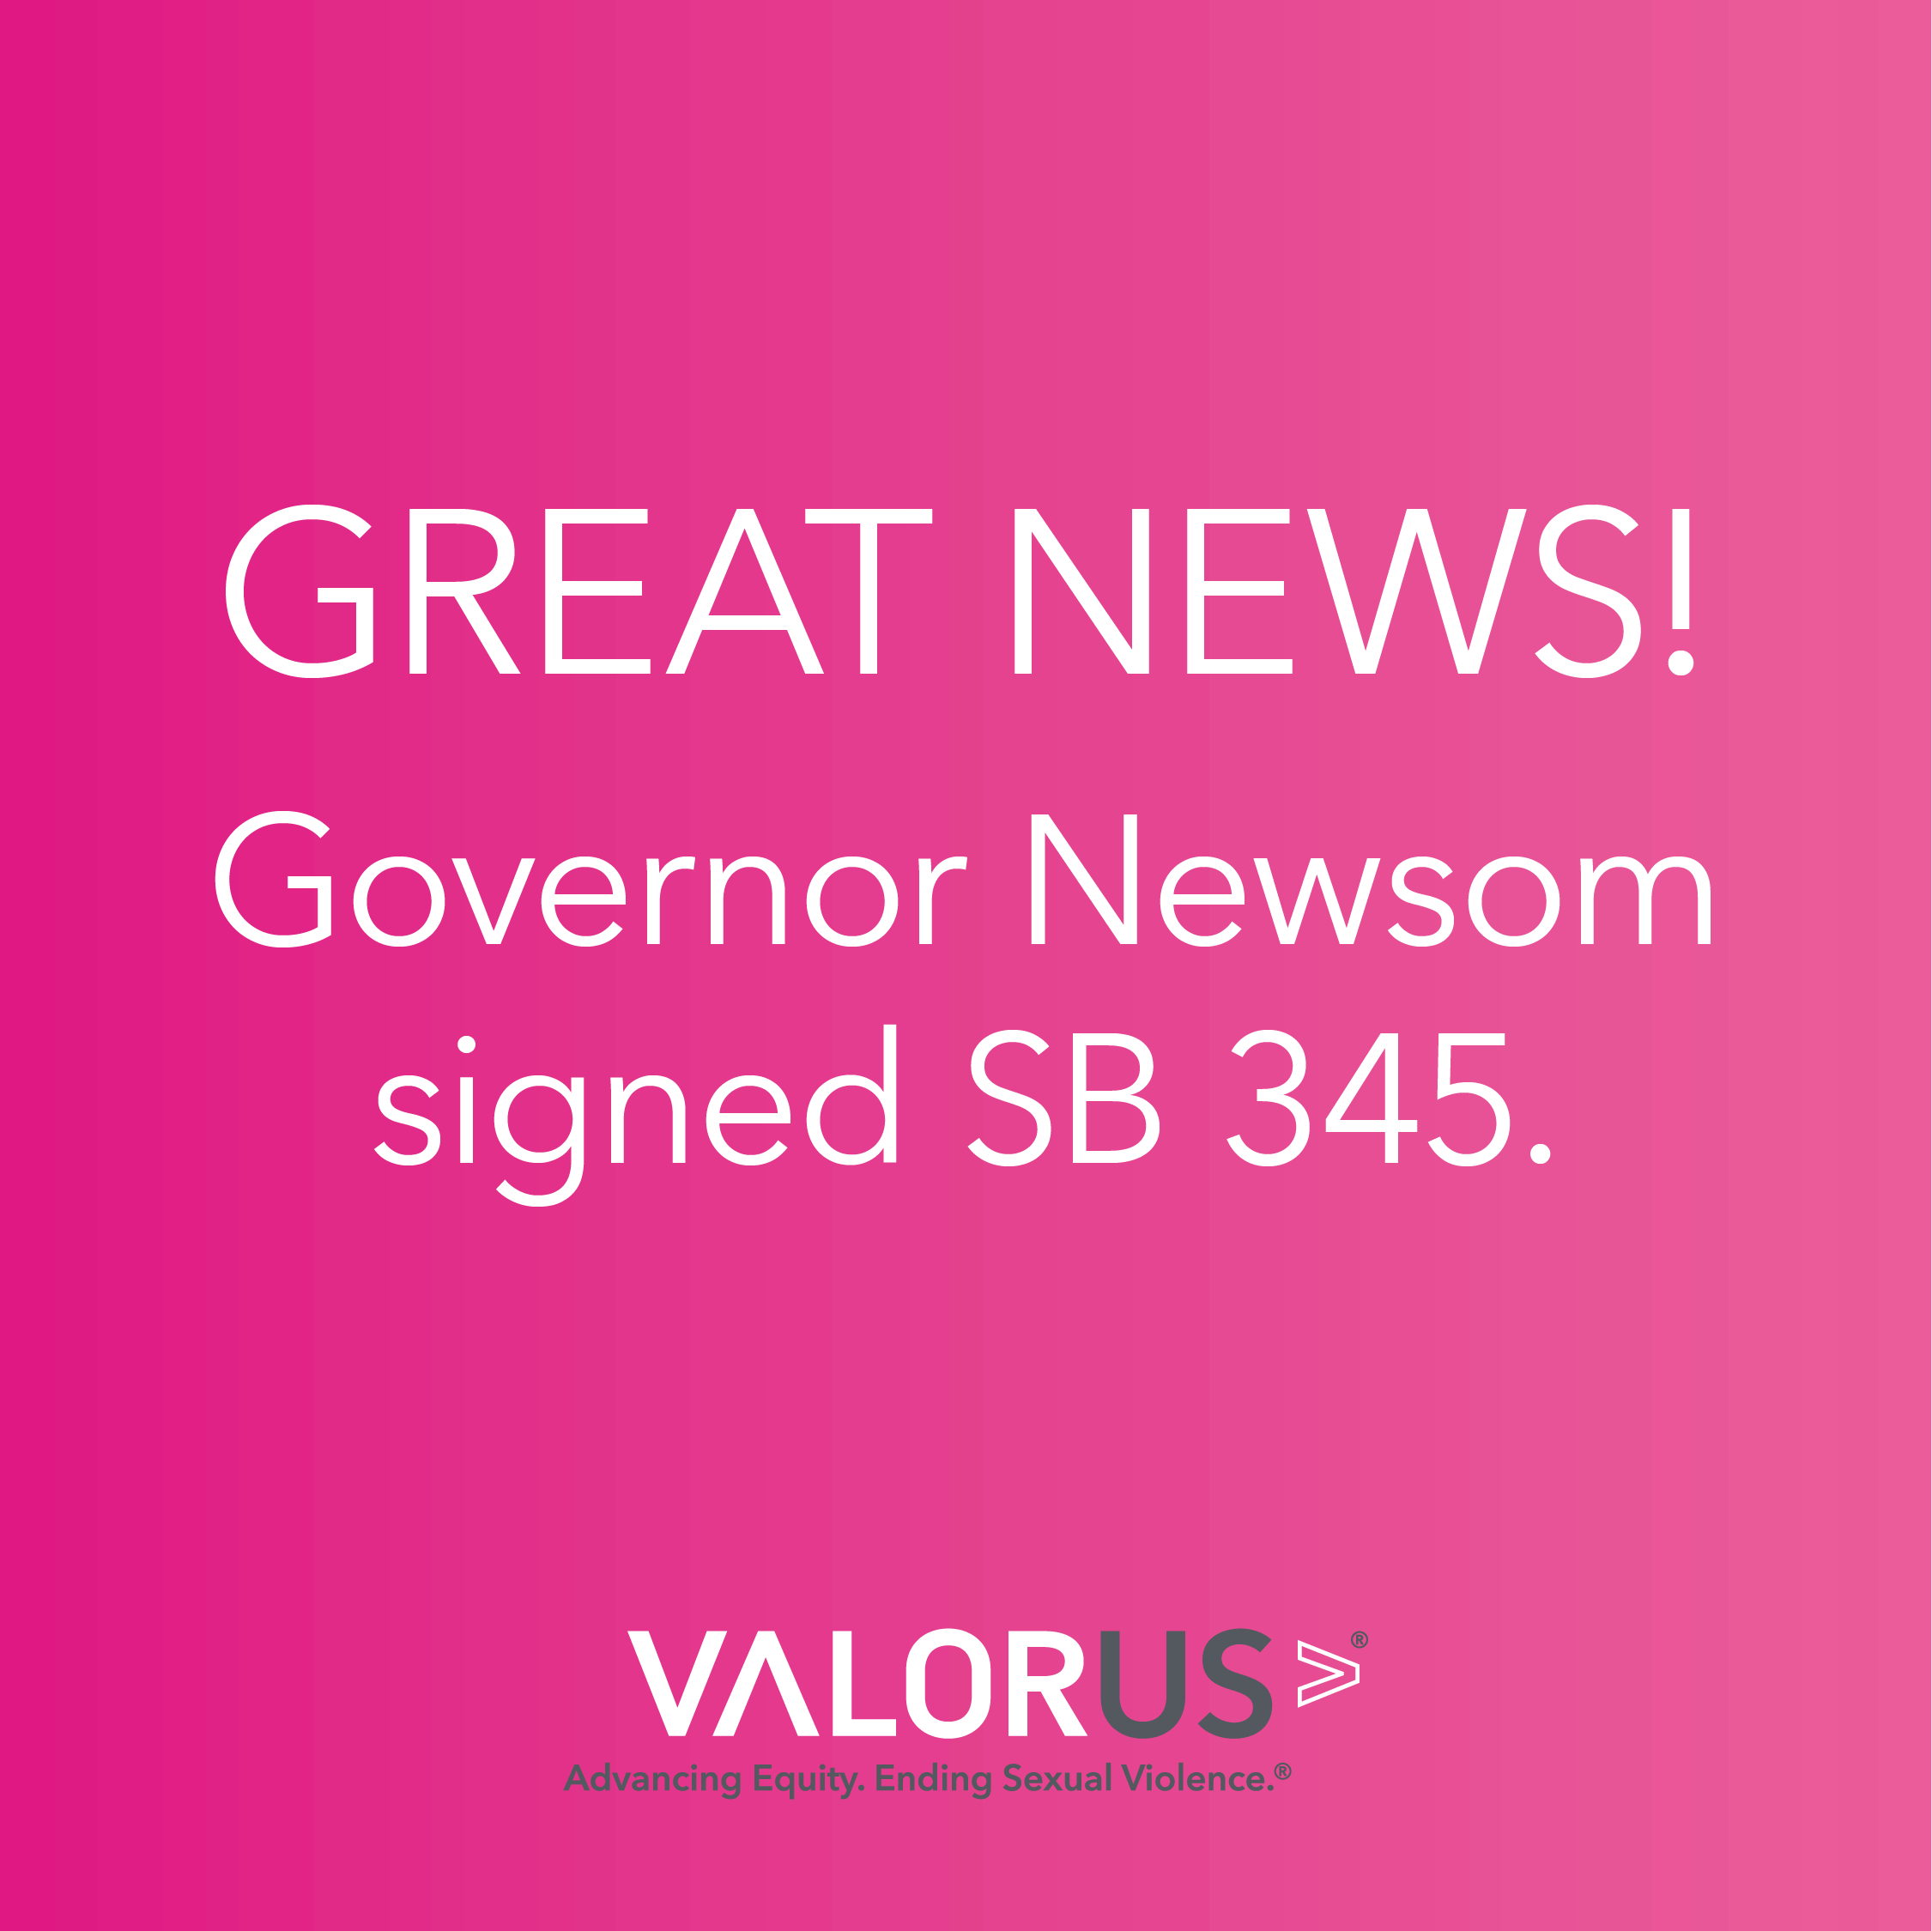 Dark pink background with text that says, "Great news! Governor Newsom signed SB 345."